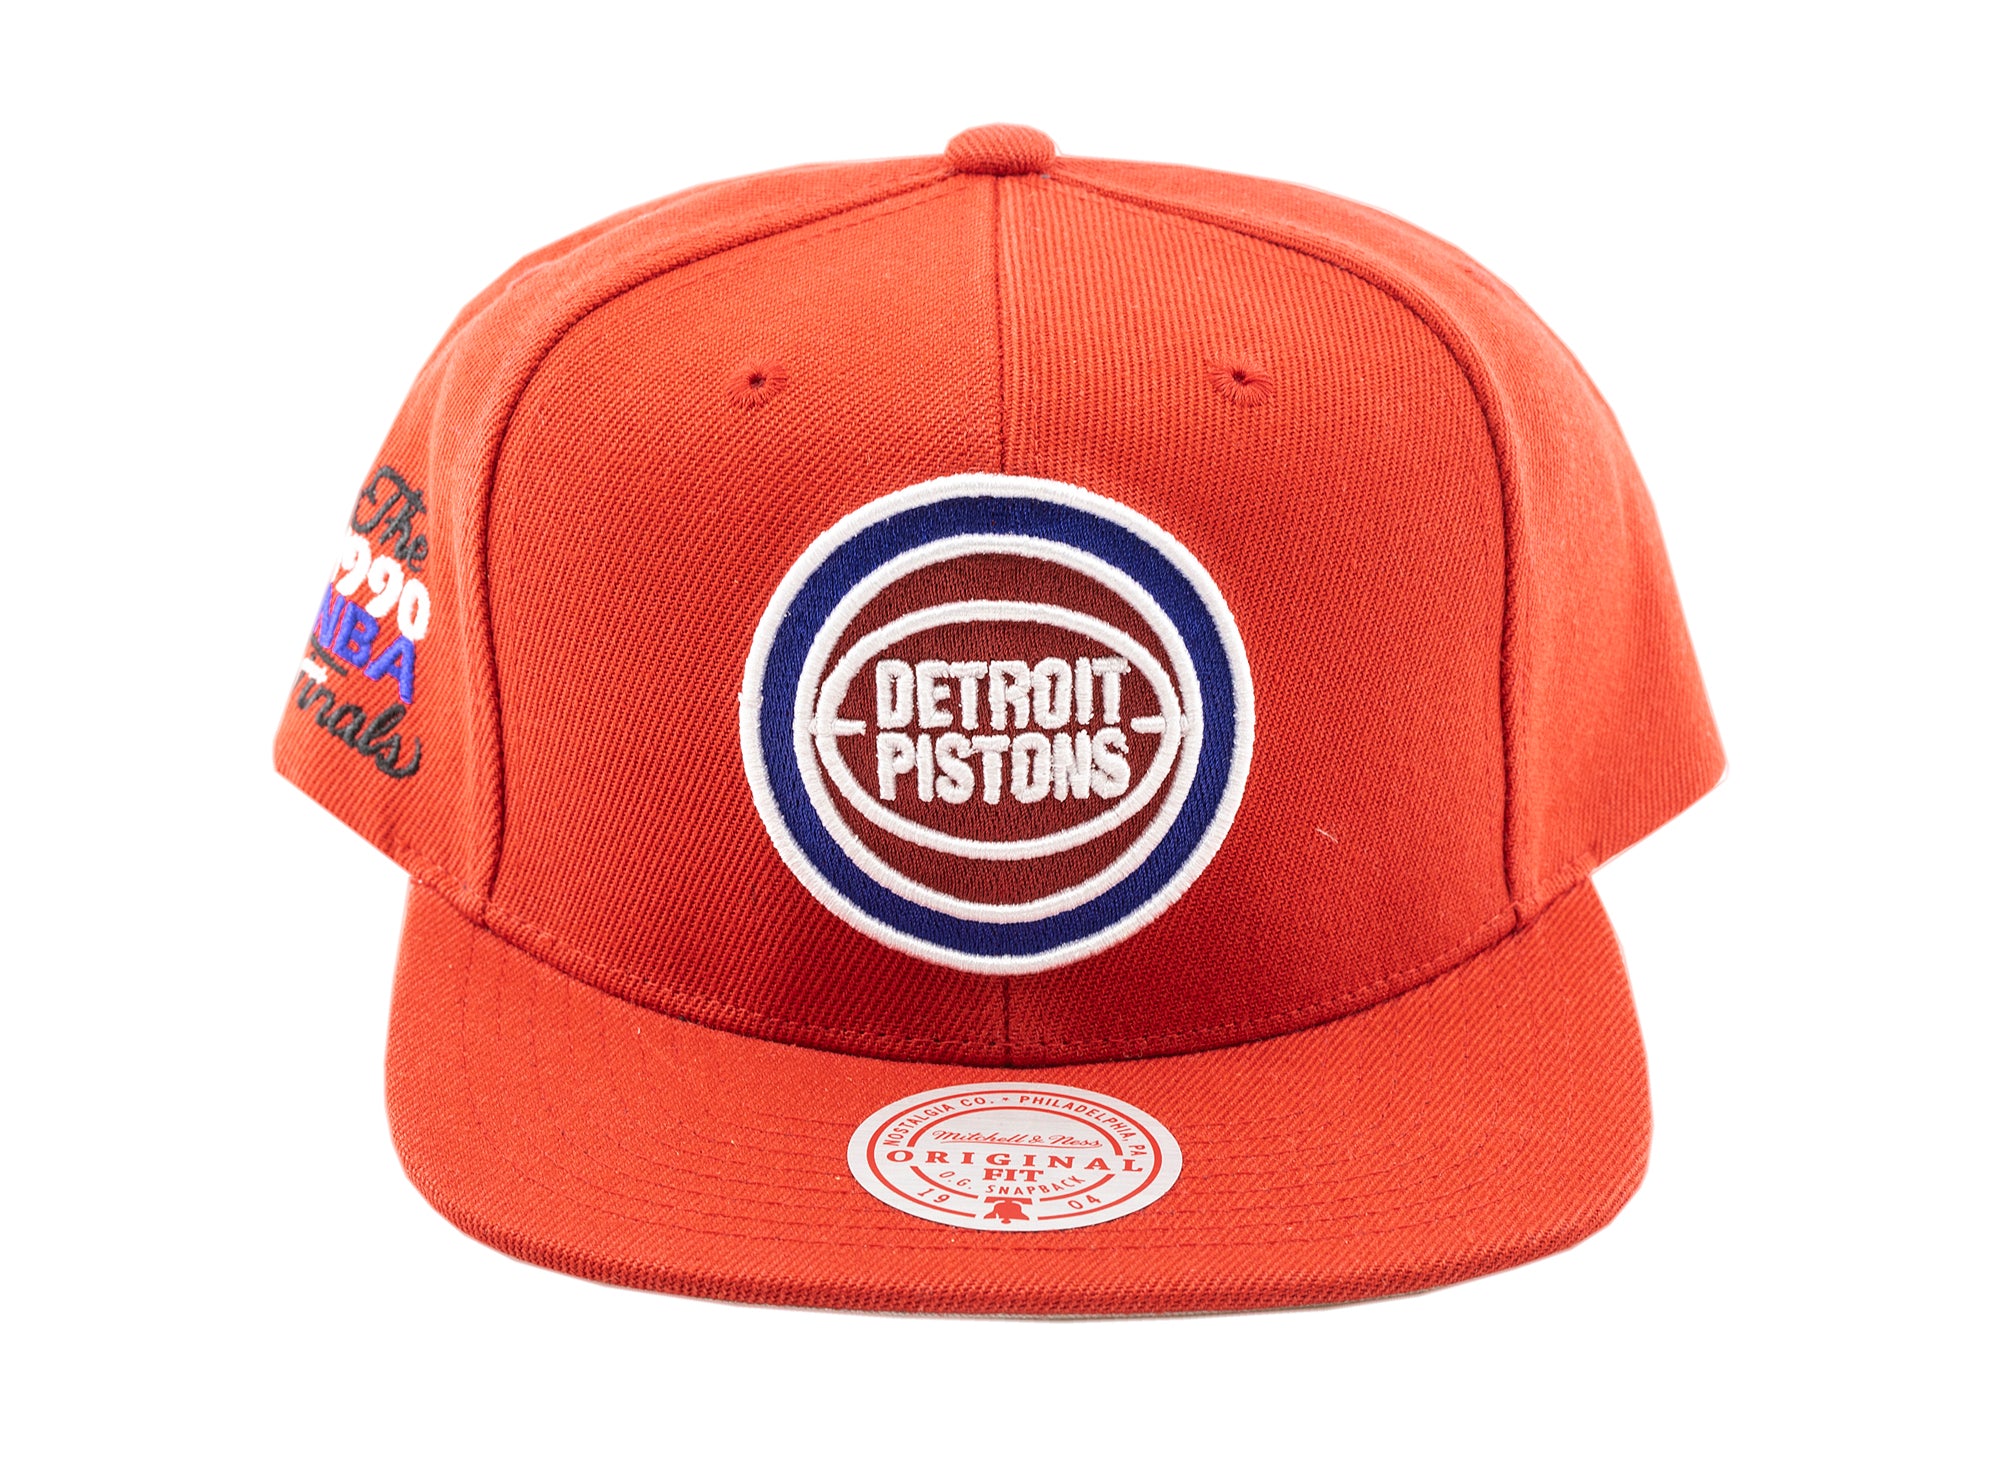 Men's Detroit Pistons Mitchell & Ness Red Core Side Snapback Hat